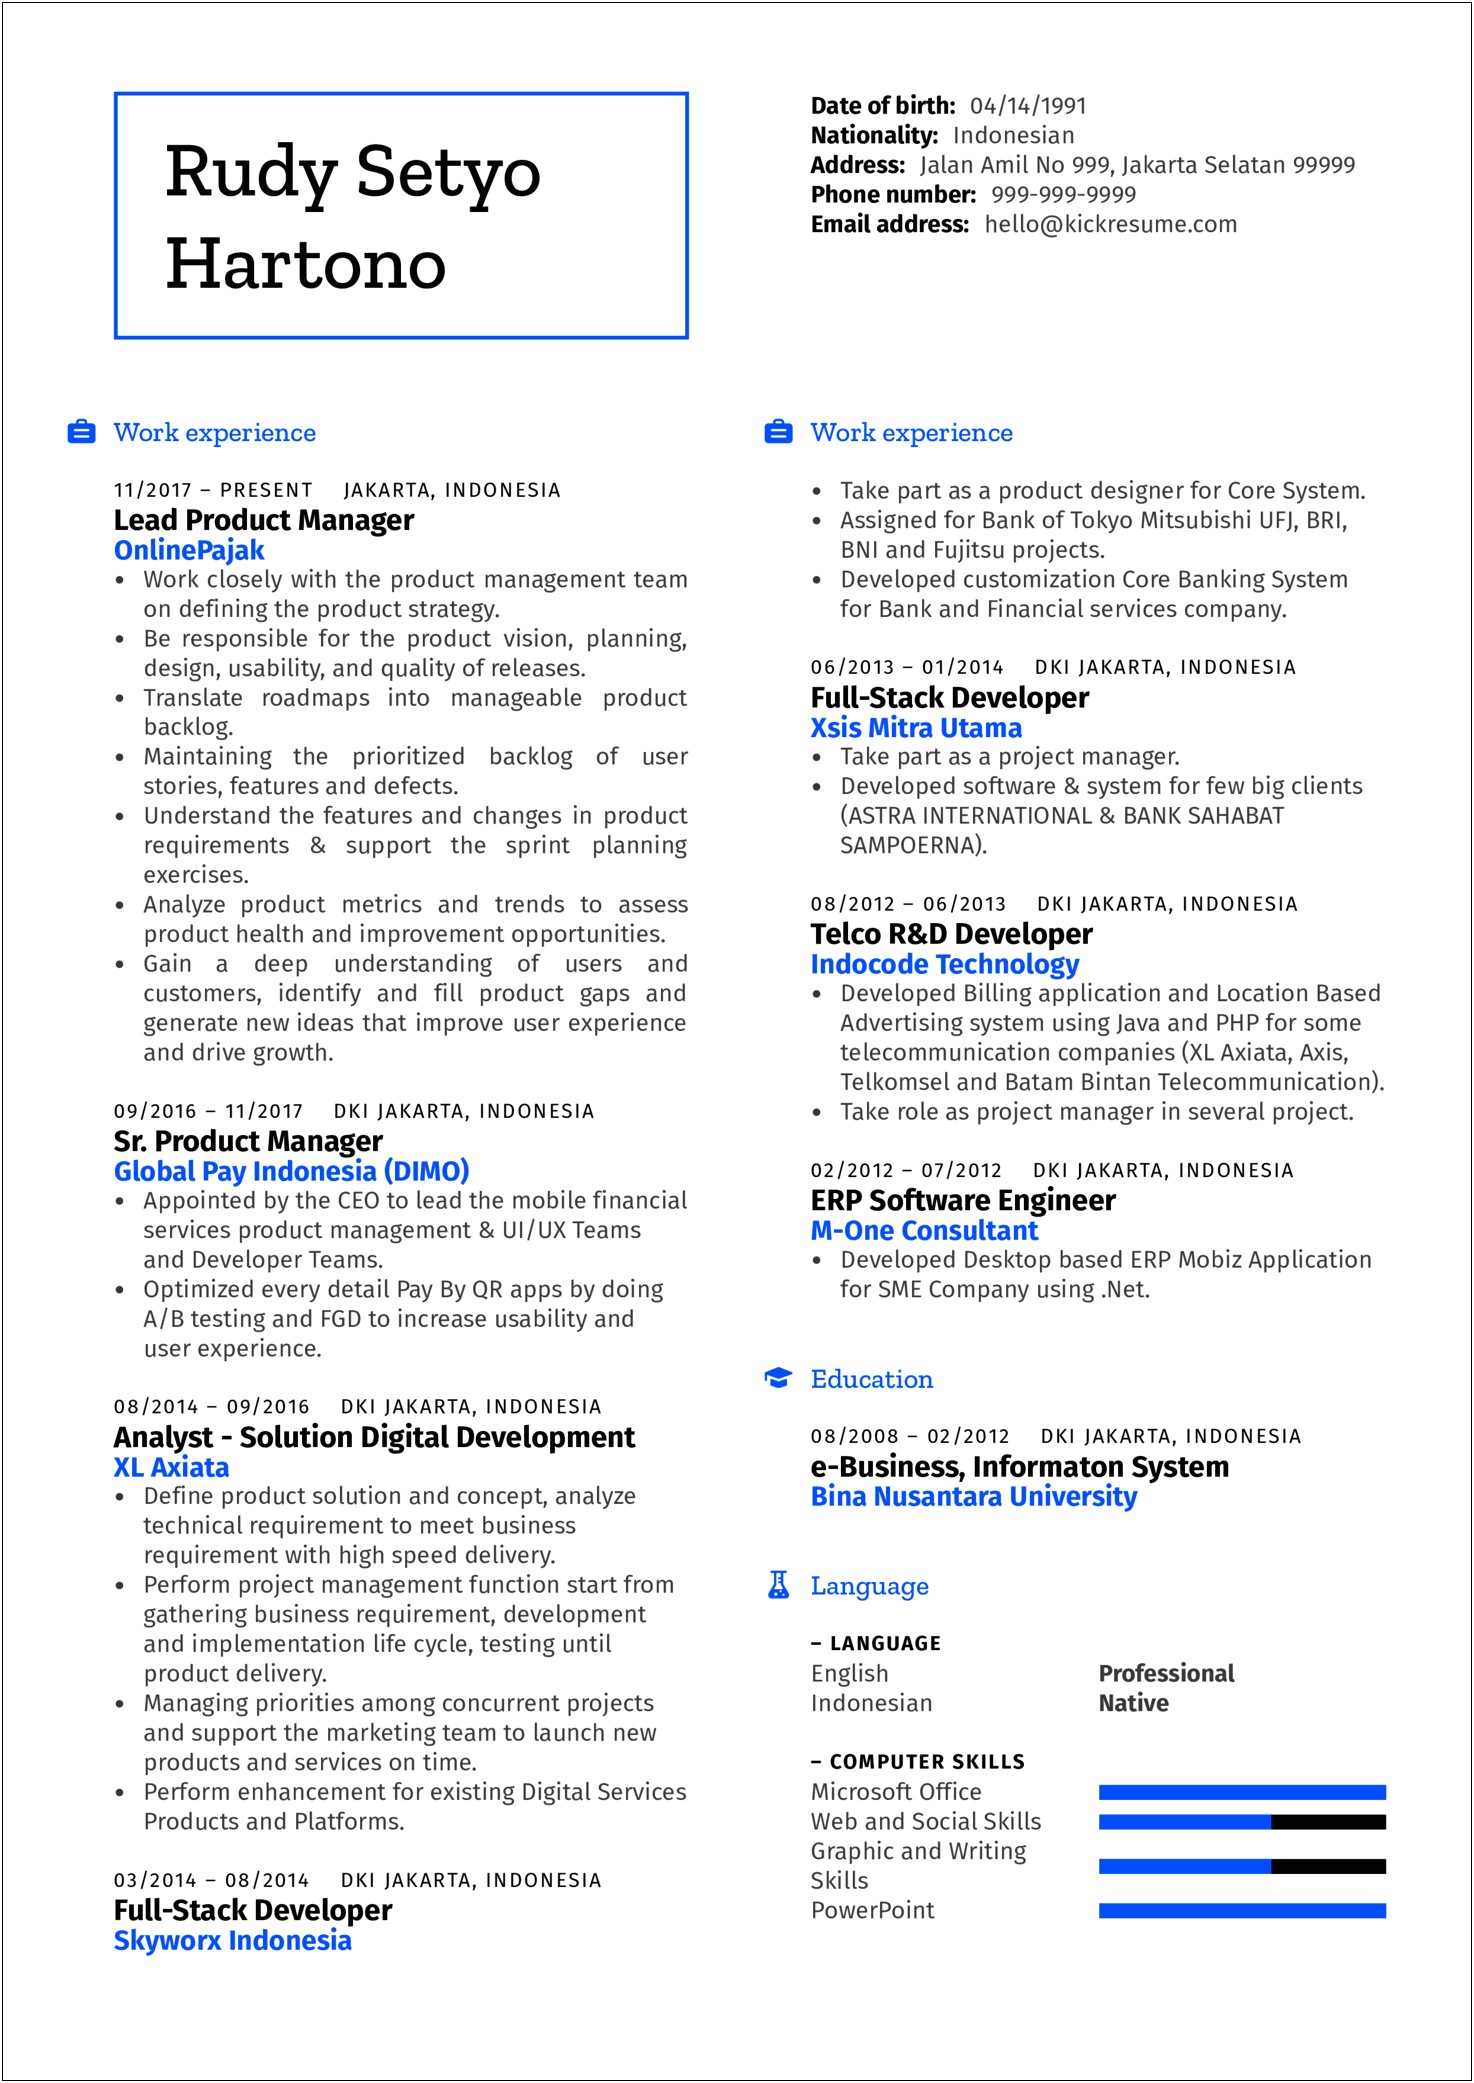 It Technical Manager Resume Summary